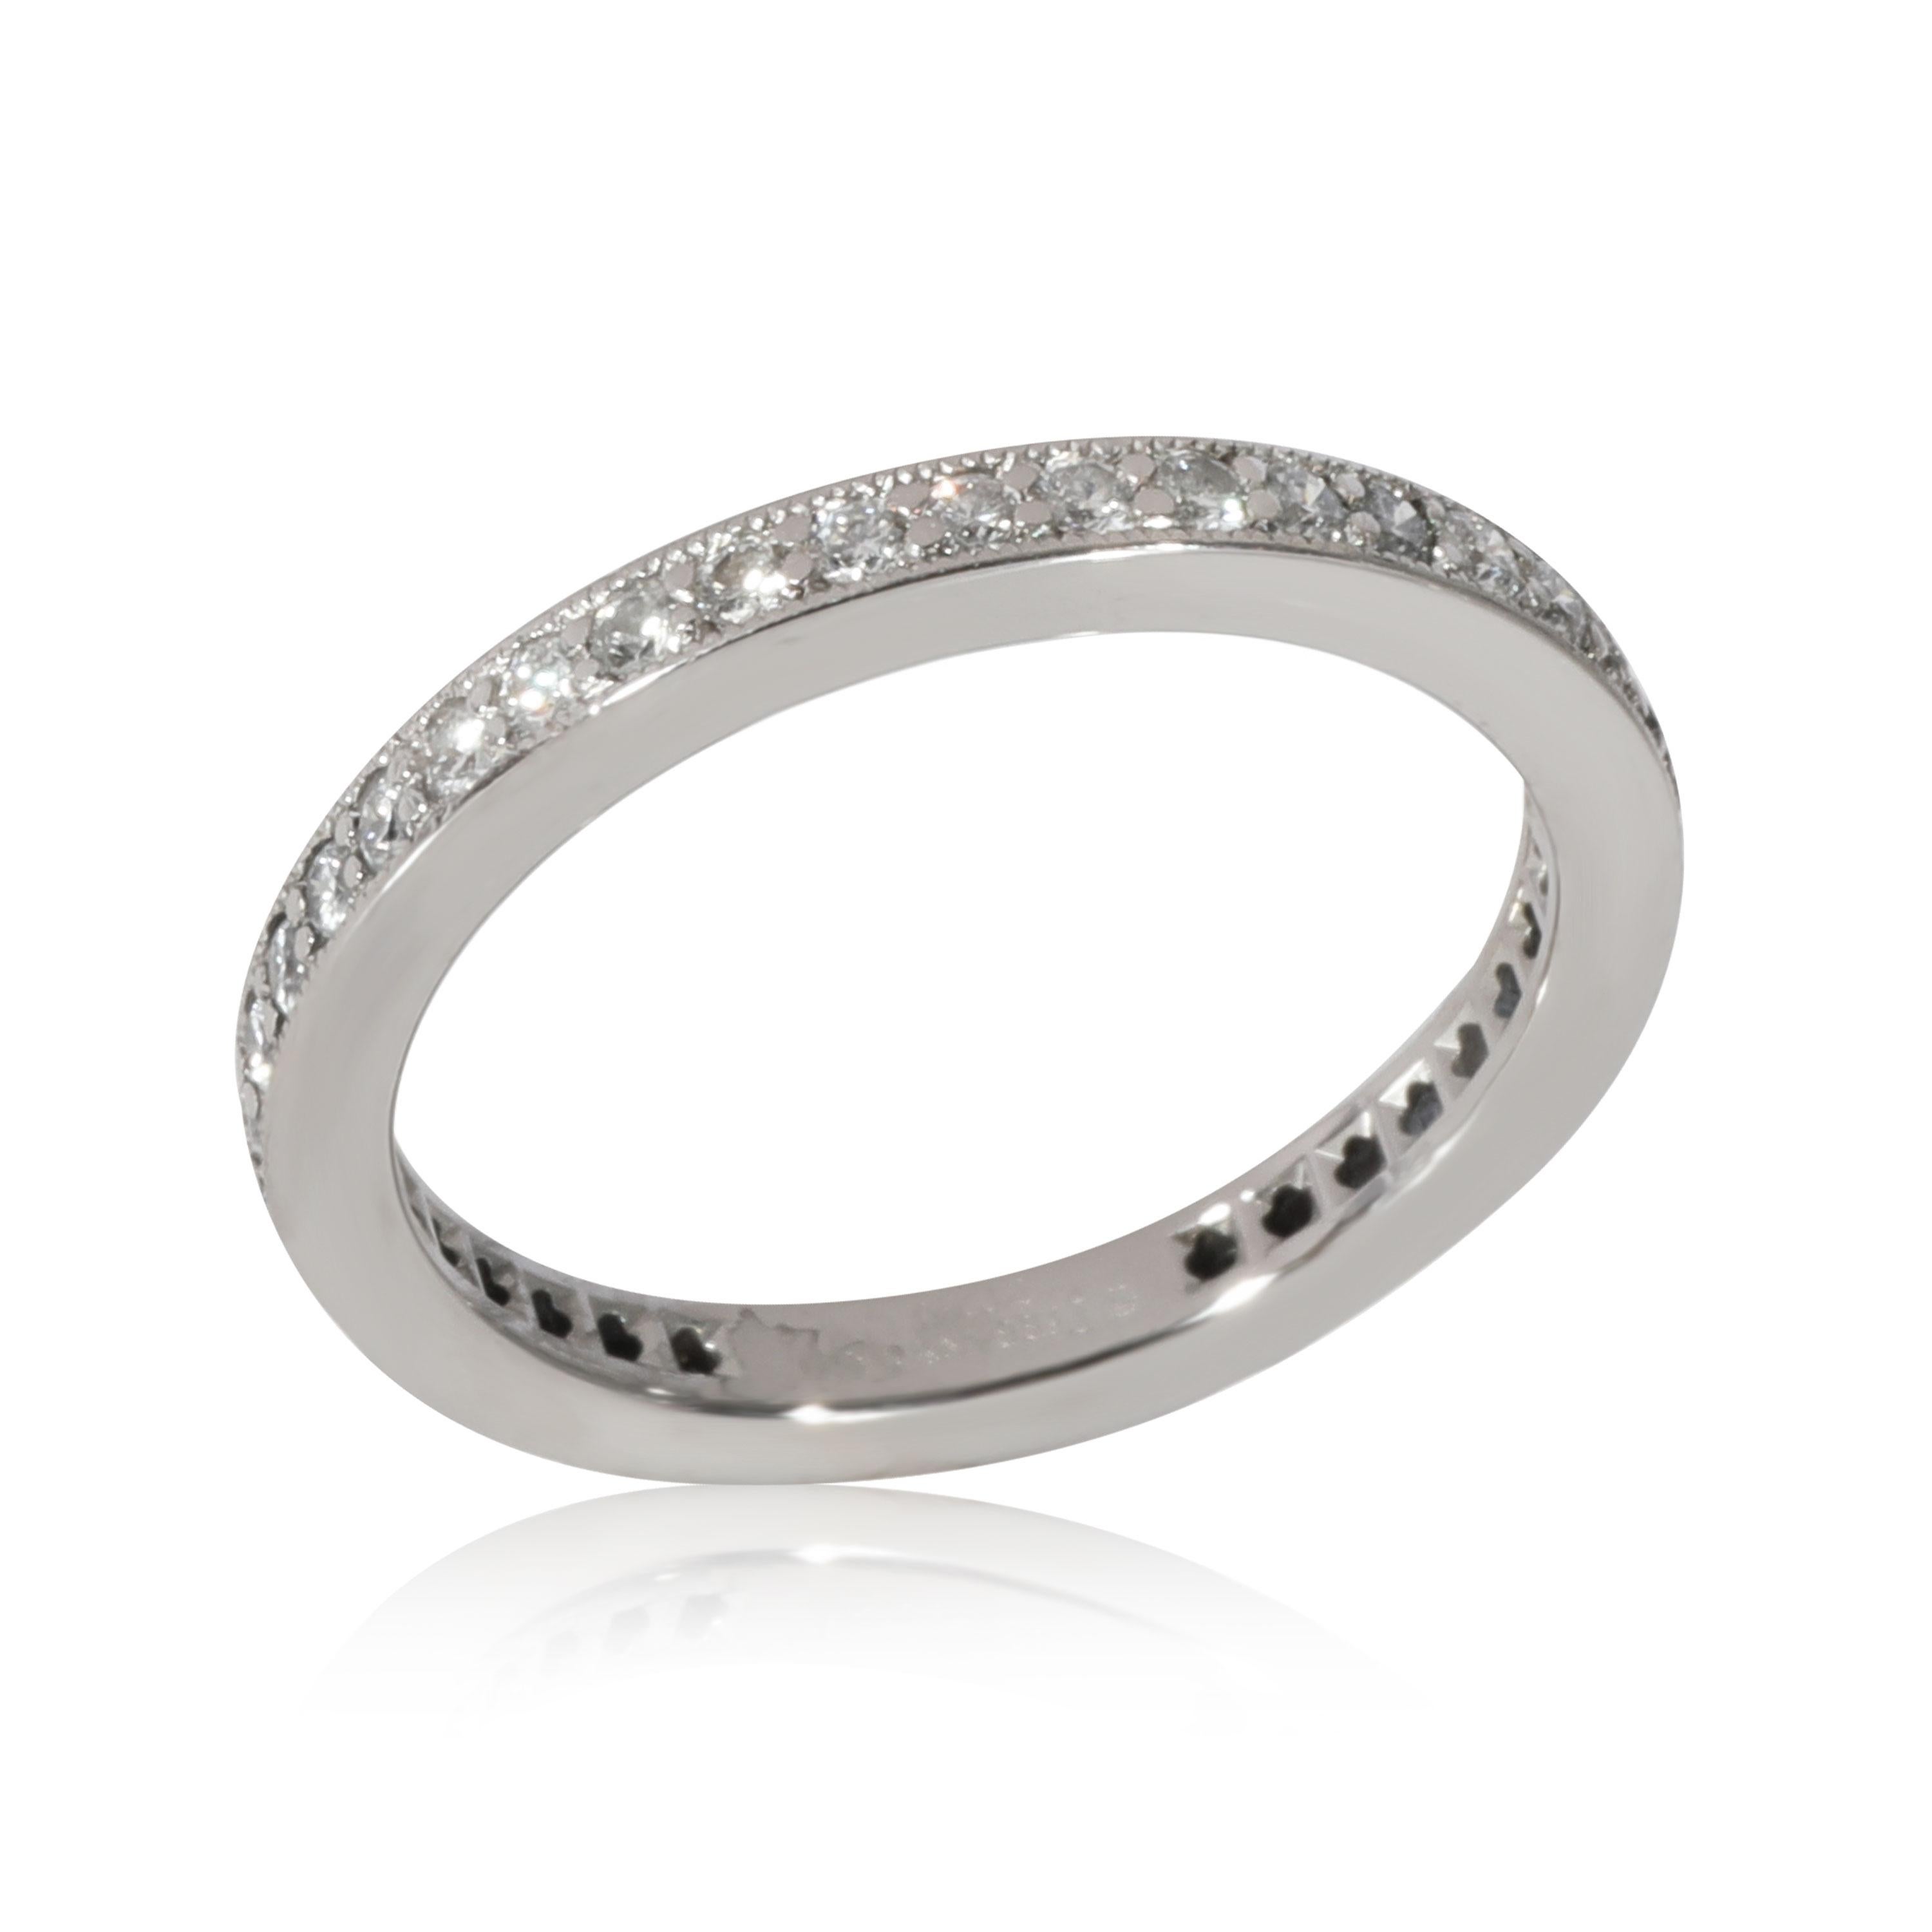 Tiffany & Co. Legacy Diamond Eternity Band in Platinum 0.40 Ctw For Sale 1